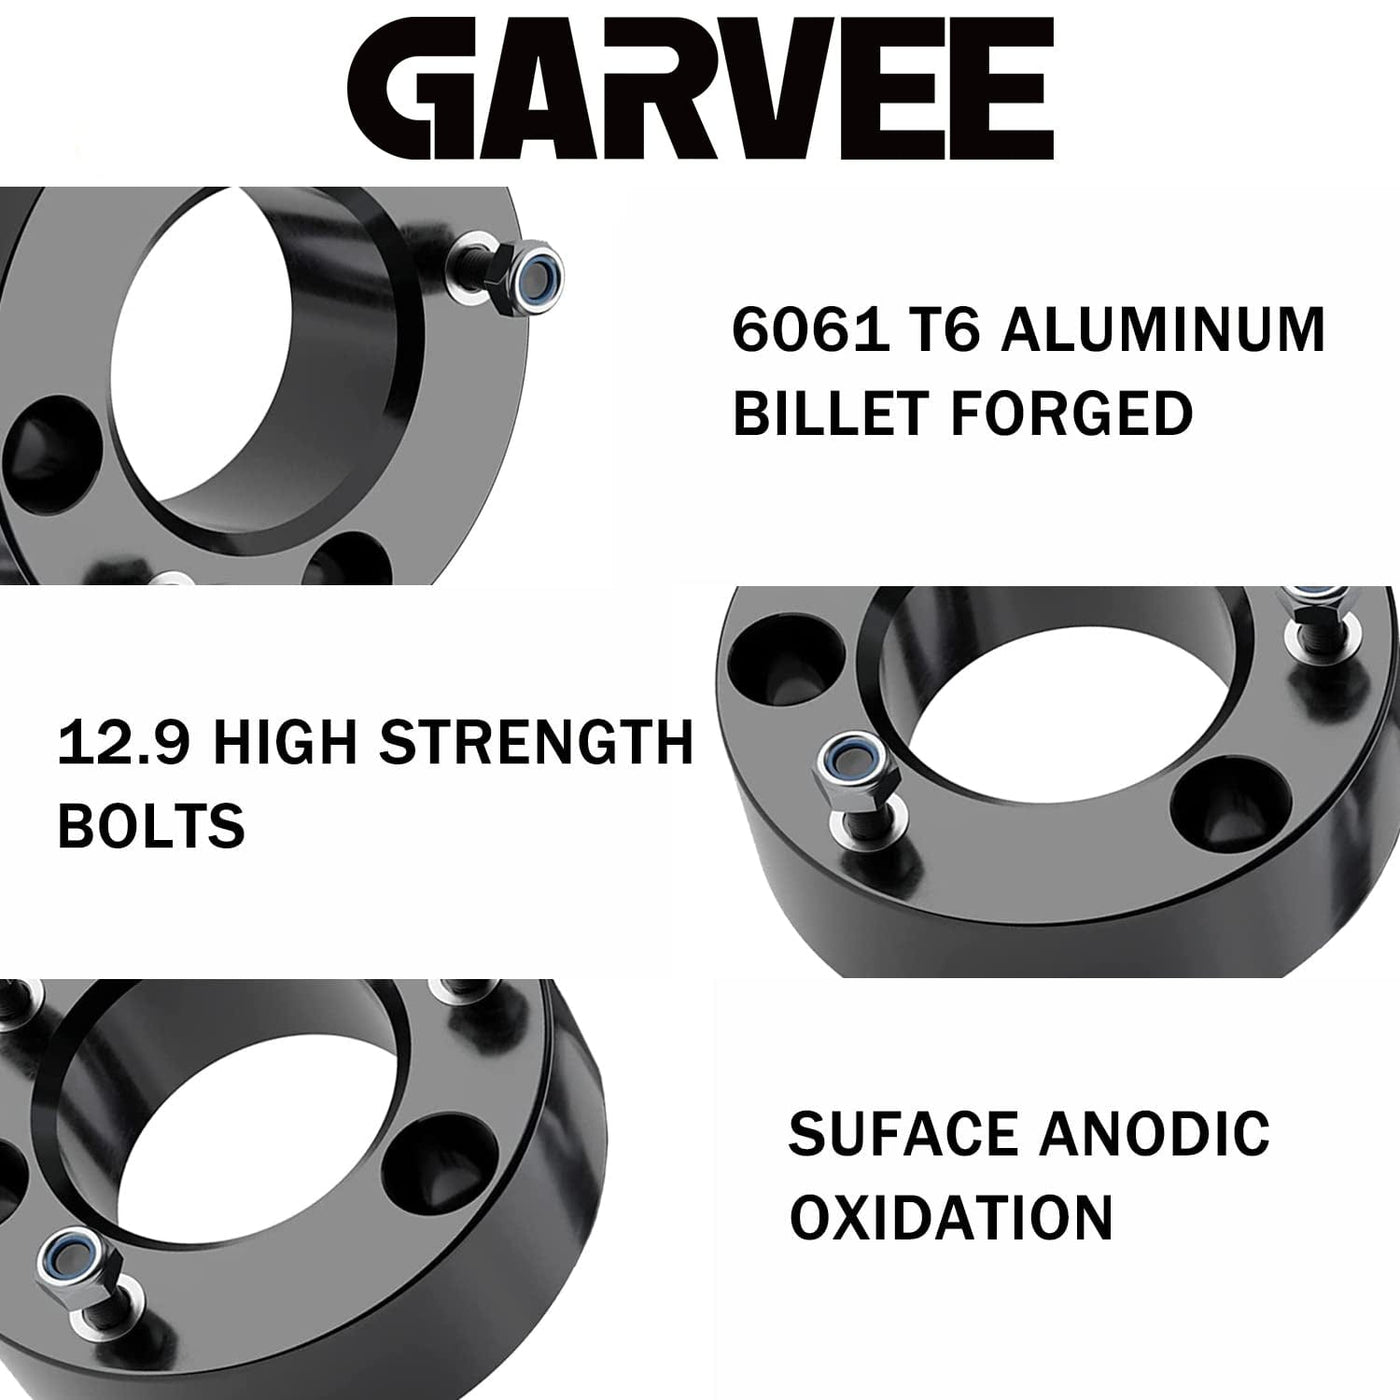 GARVEE 2.5 inch Silverdo 1500 Front Leveling Kits Front Strut Spacers Lift Kit for 2007-2021 Silverado 1500 2WD/4WD